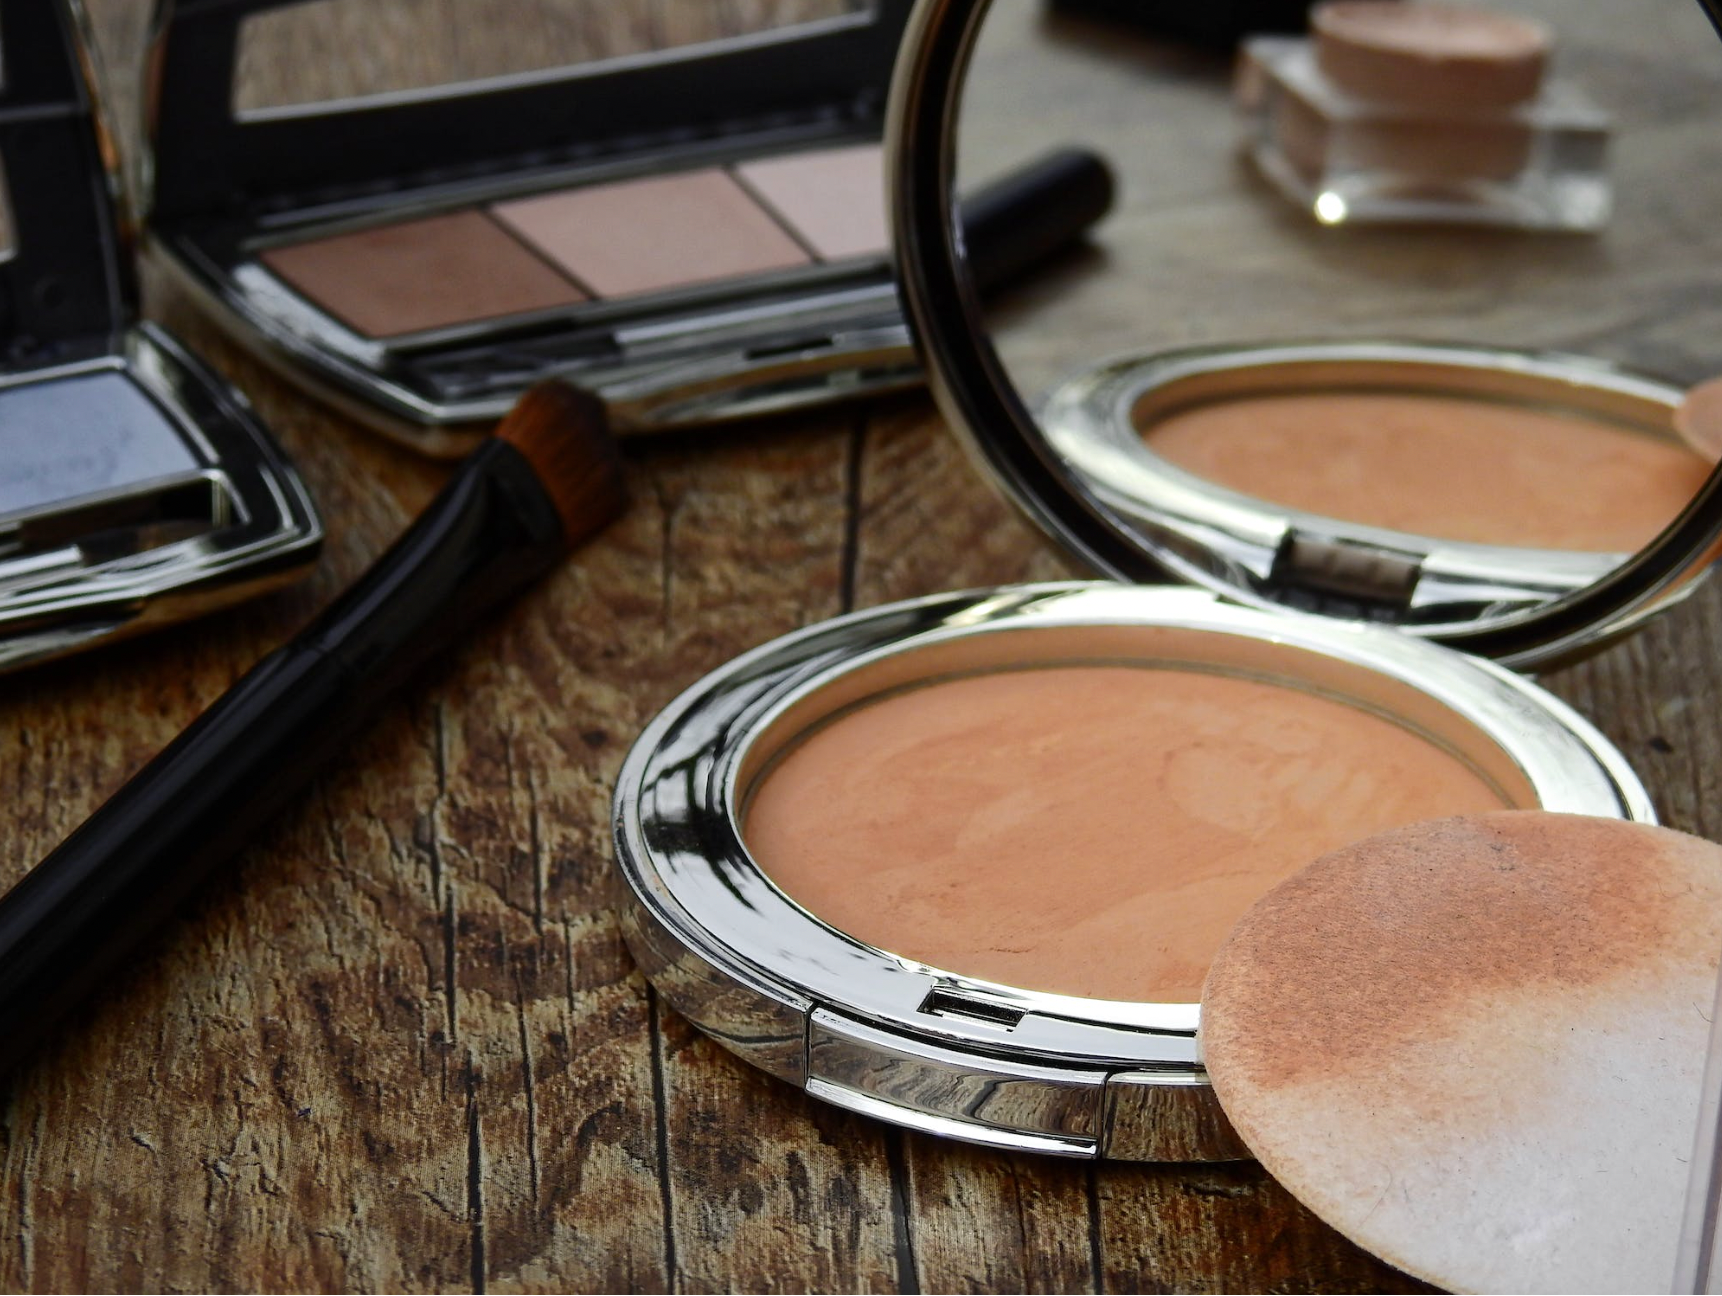 The Ultimate Guide to Applying Blush for a Natural Glow